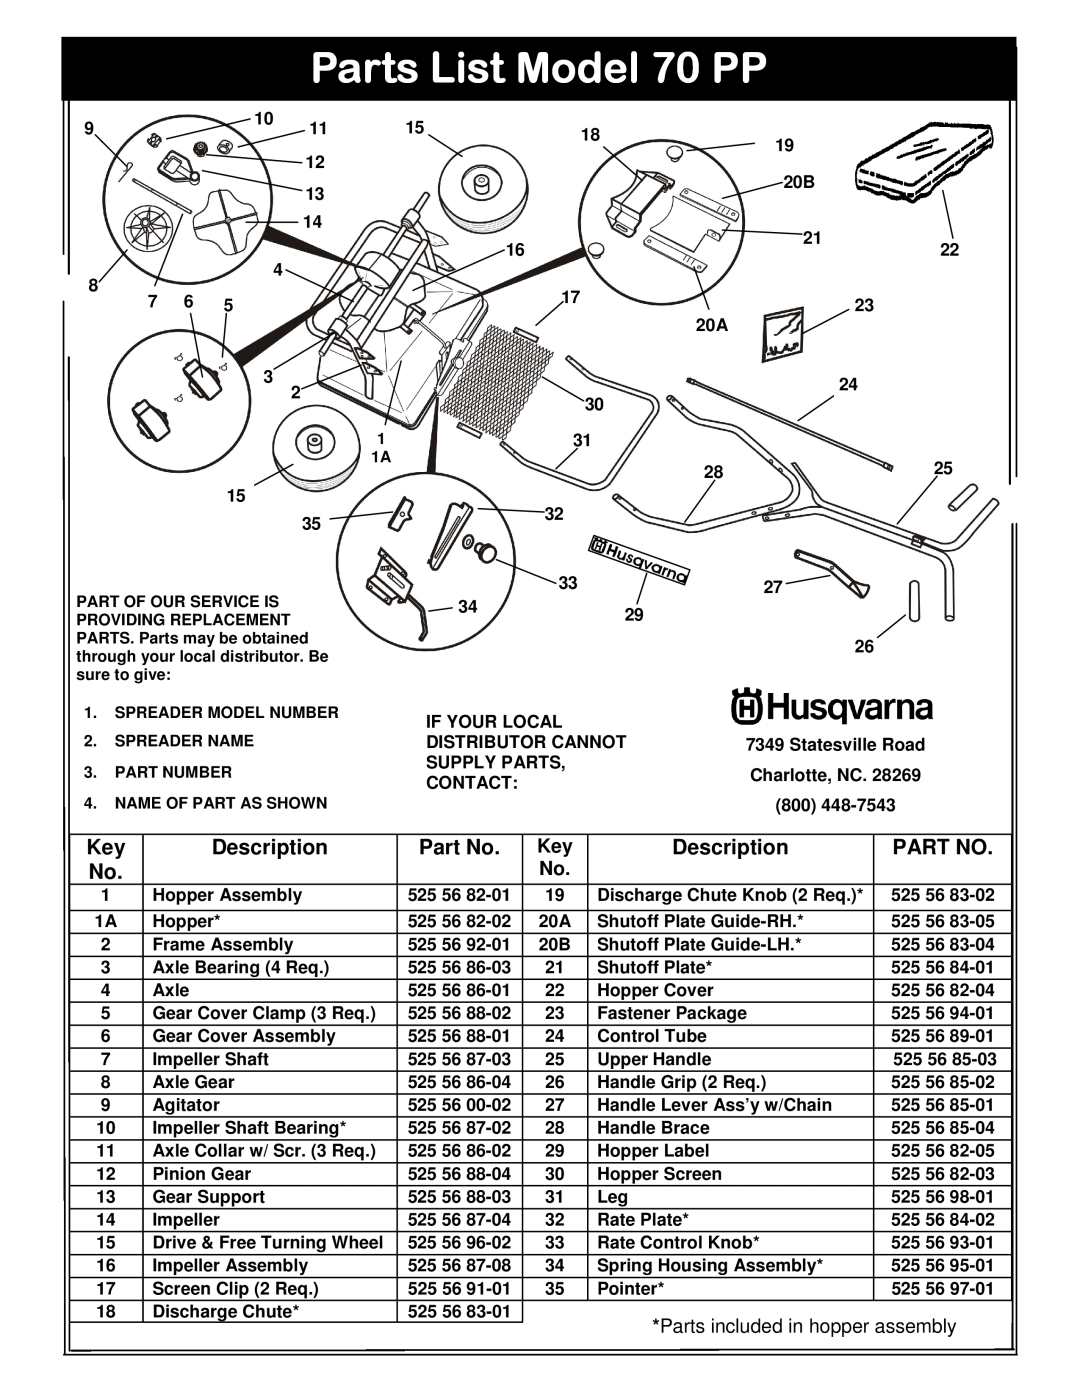 Husqvarna 966043501 owner manual Parts List Model 70 PP, Parts included in hopper assembly 